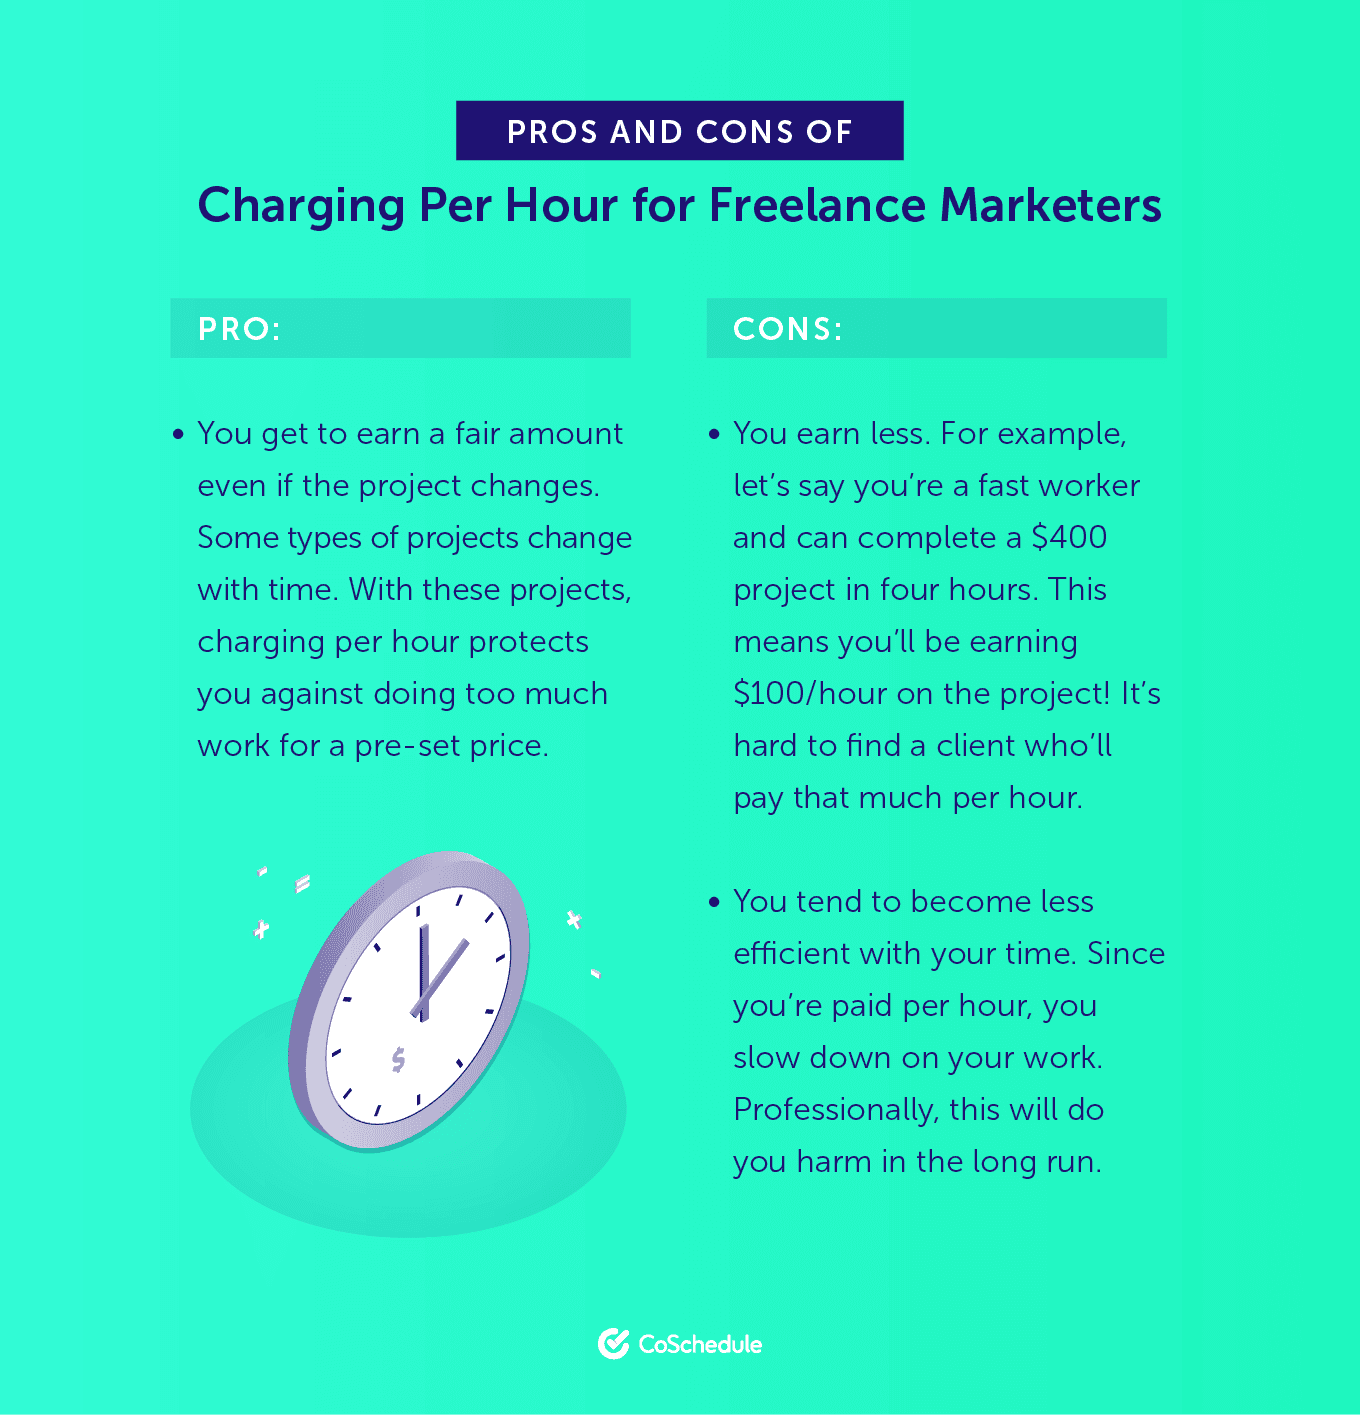 Pros and Cons of Charging Per Hour for Freelance Marketers